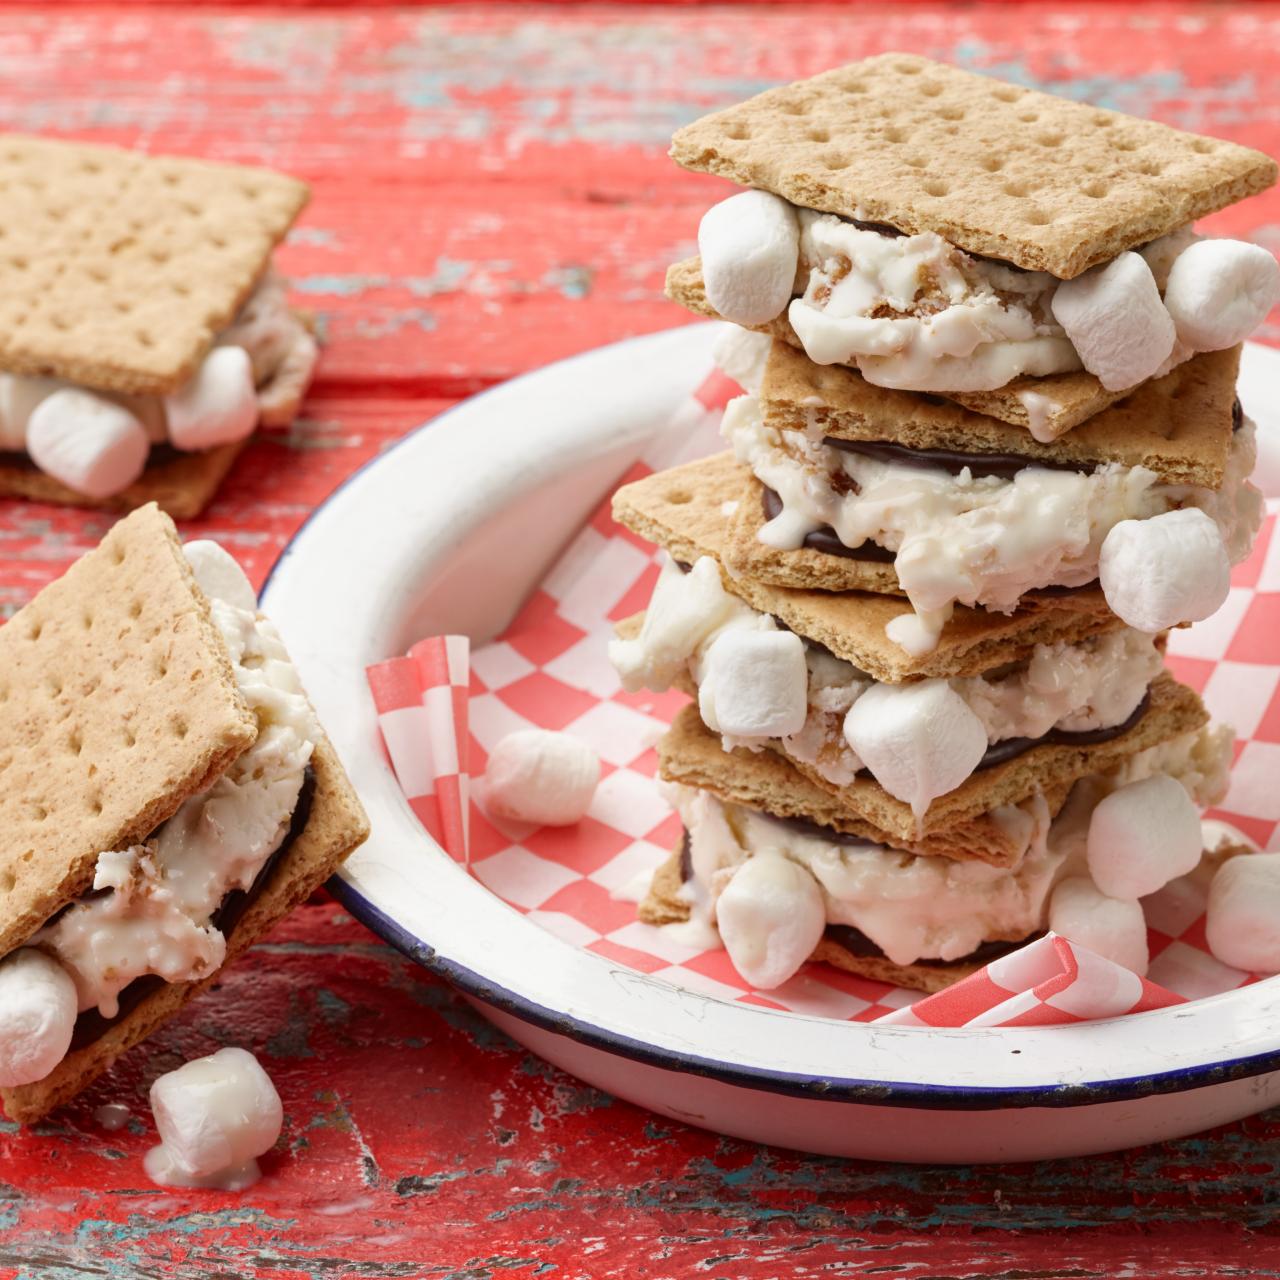 Things That Will Help You Make The Perfect Summer S'mores